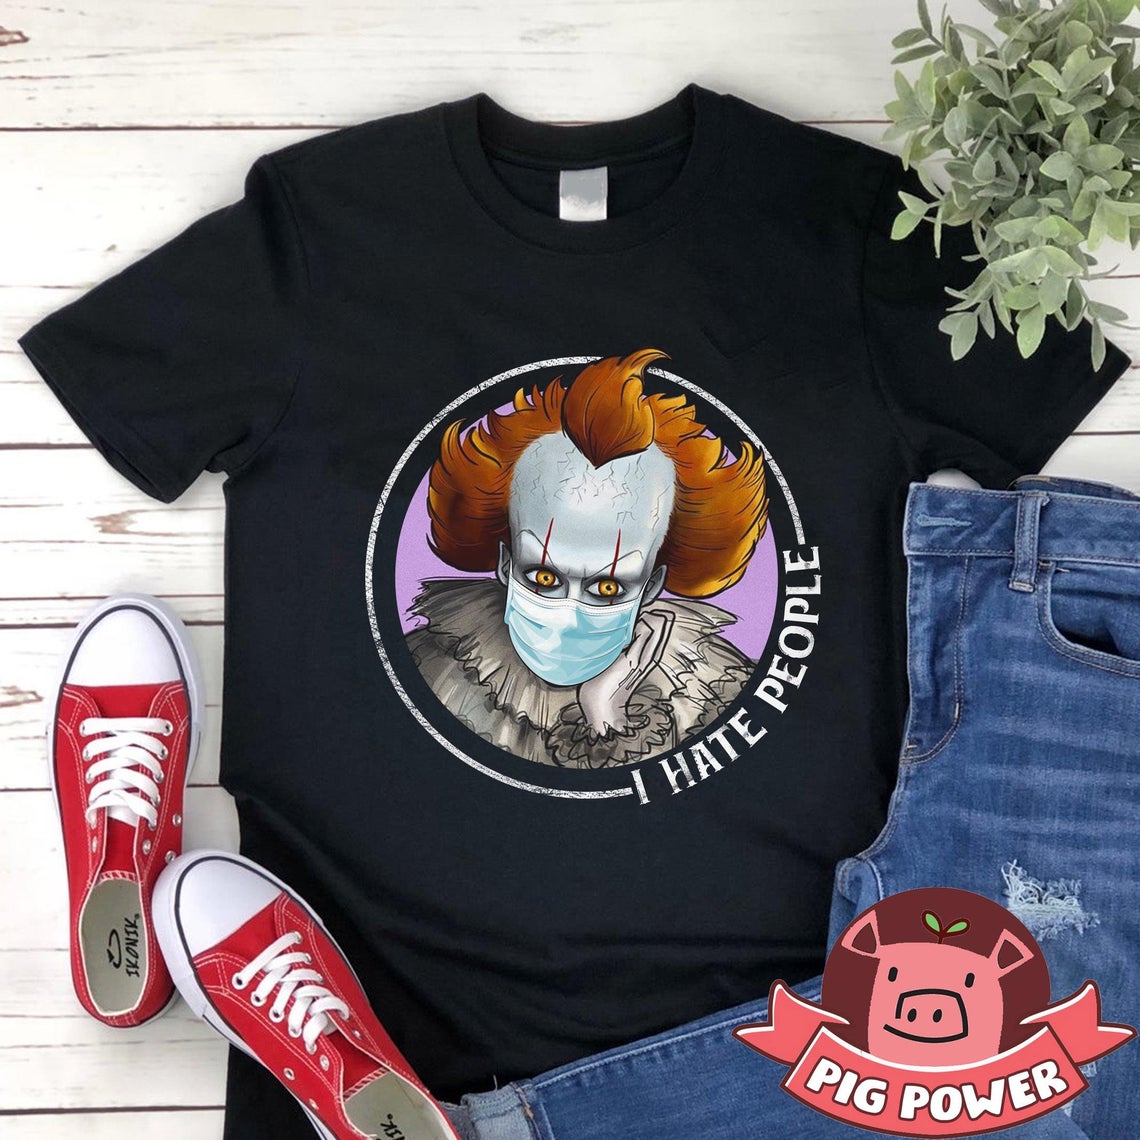 I Hate People Shirt Pennywise T-shirt Quarantined 2020 Social Distancing